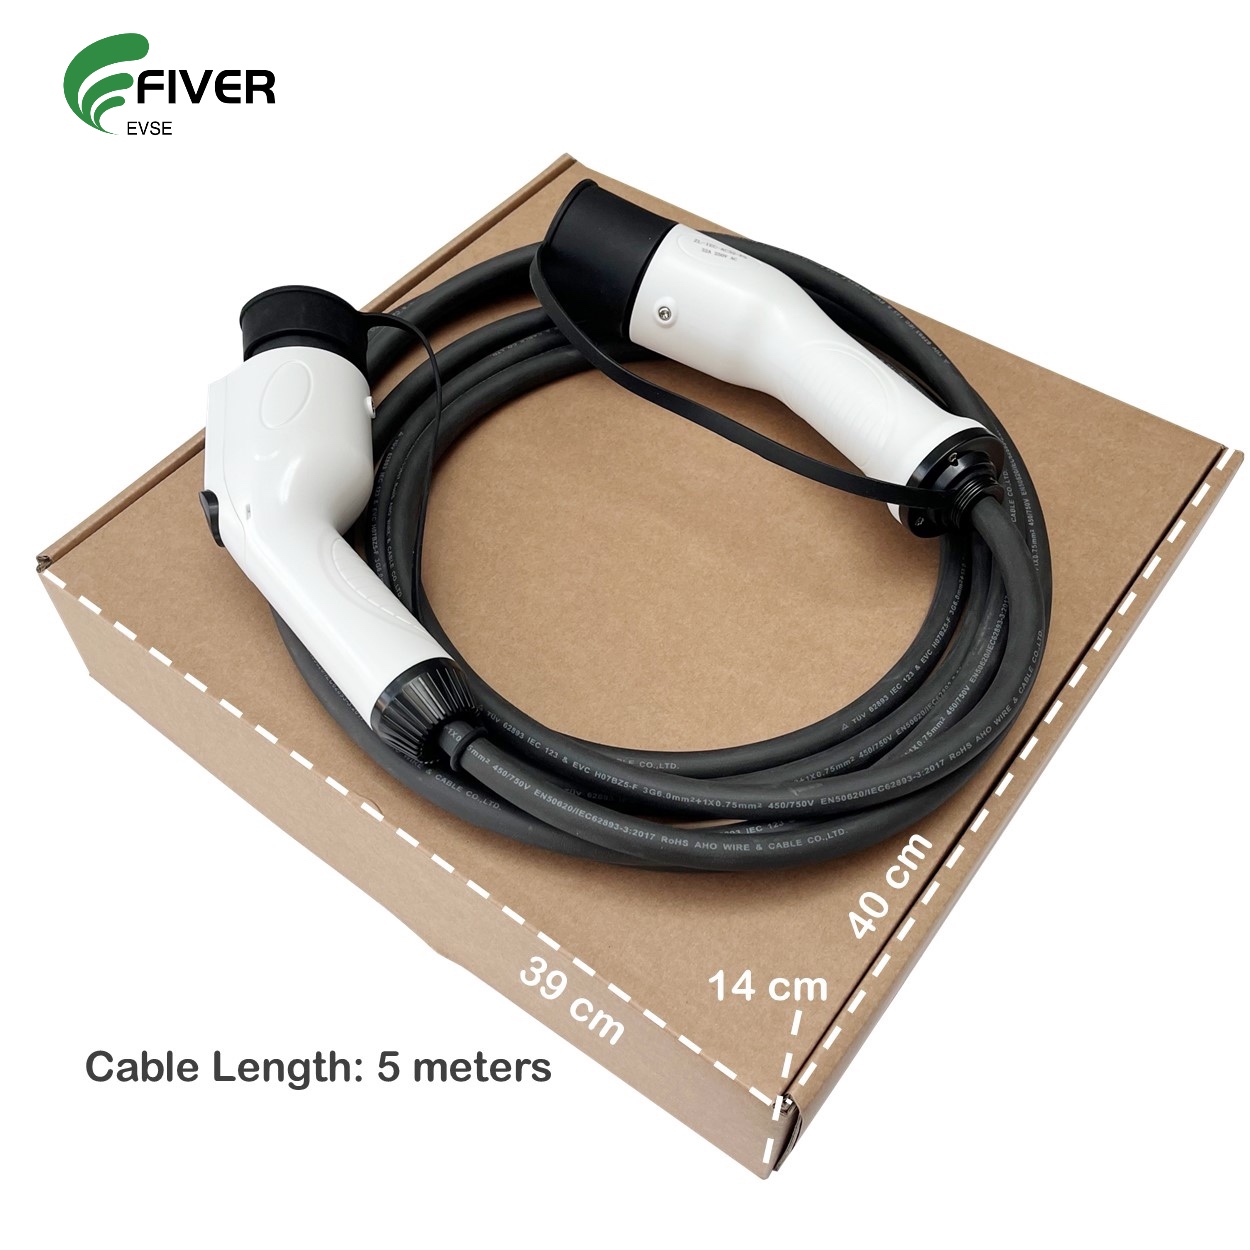 Mini - 3 Phase CEE Charging Cable. 32A 400V 22kW. Variable Amp - 10A, 16A,  26A, 32A. Type 2